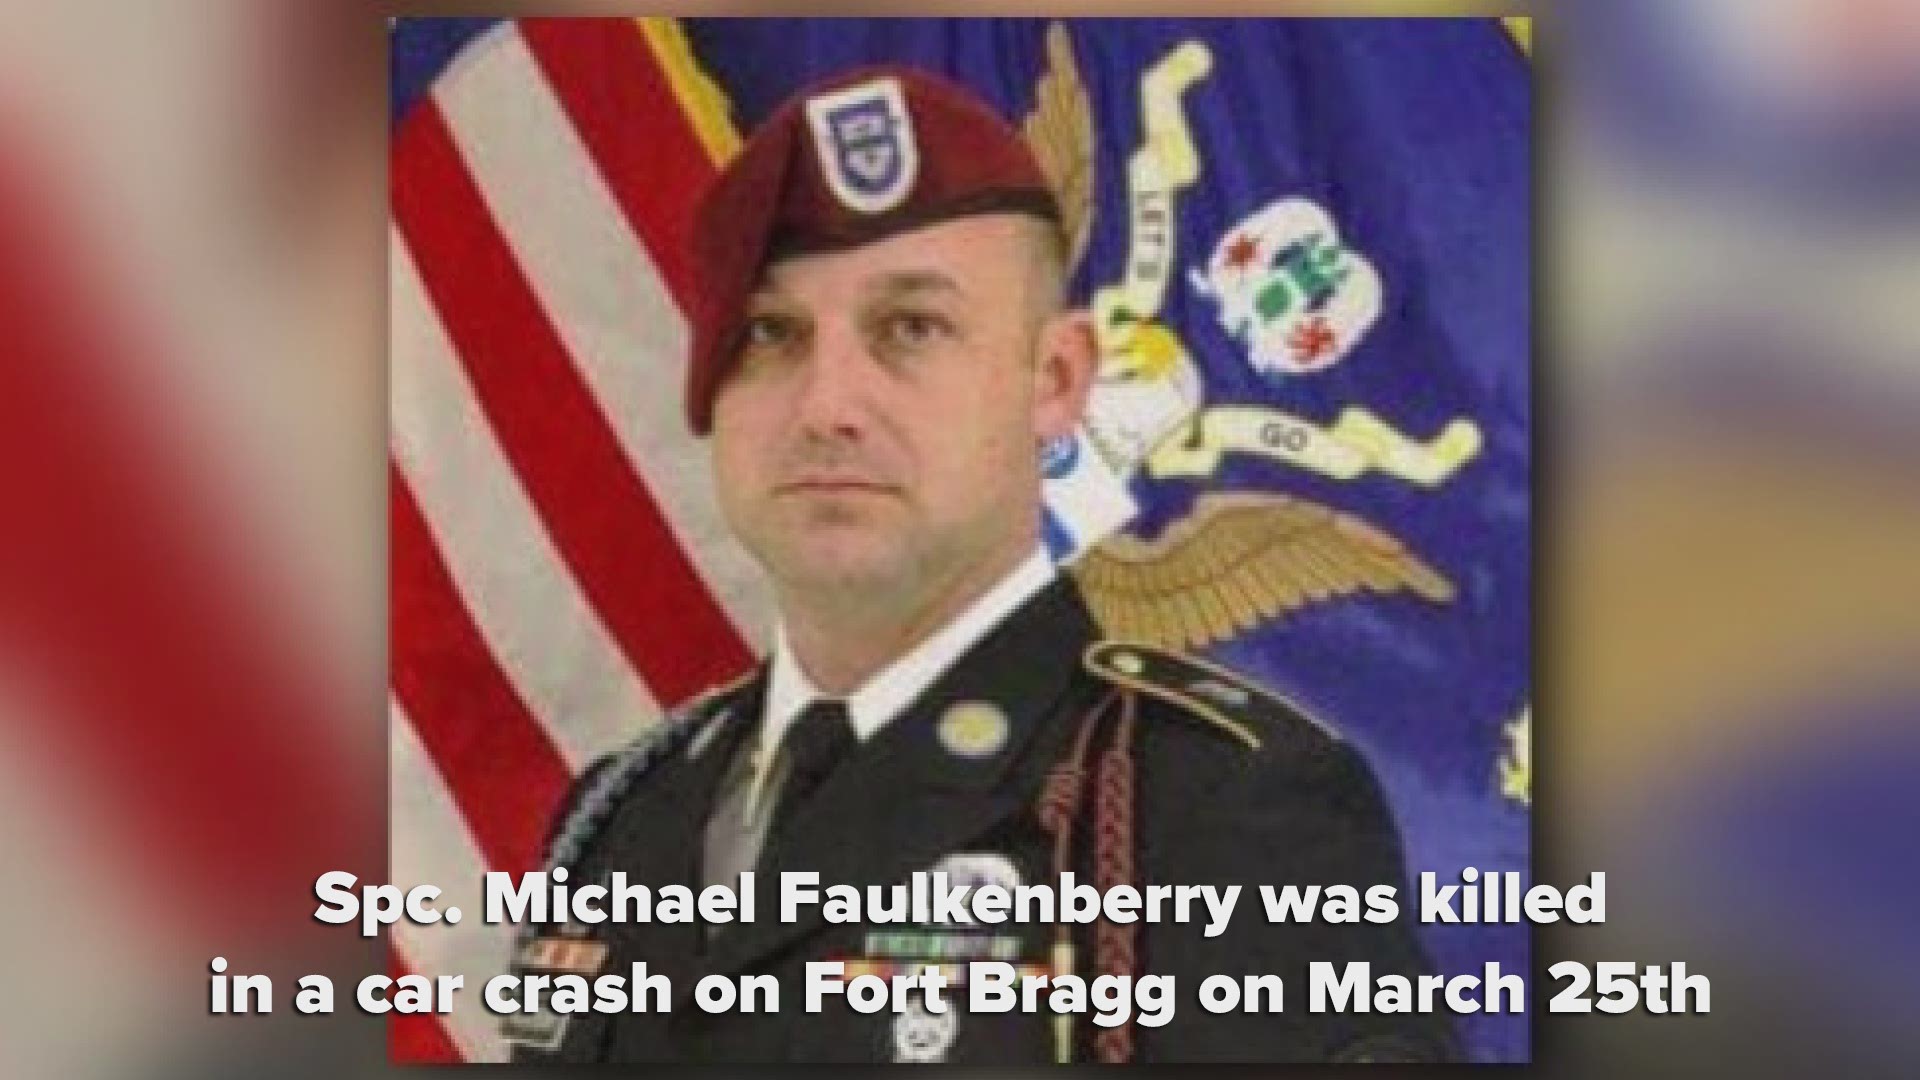 Spc. Michael Faulkenberry, an 82nd Airborne Division paratrooper from Harrison, was killed in a car crash on Fort Bragg, North Carolina on March 25.